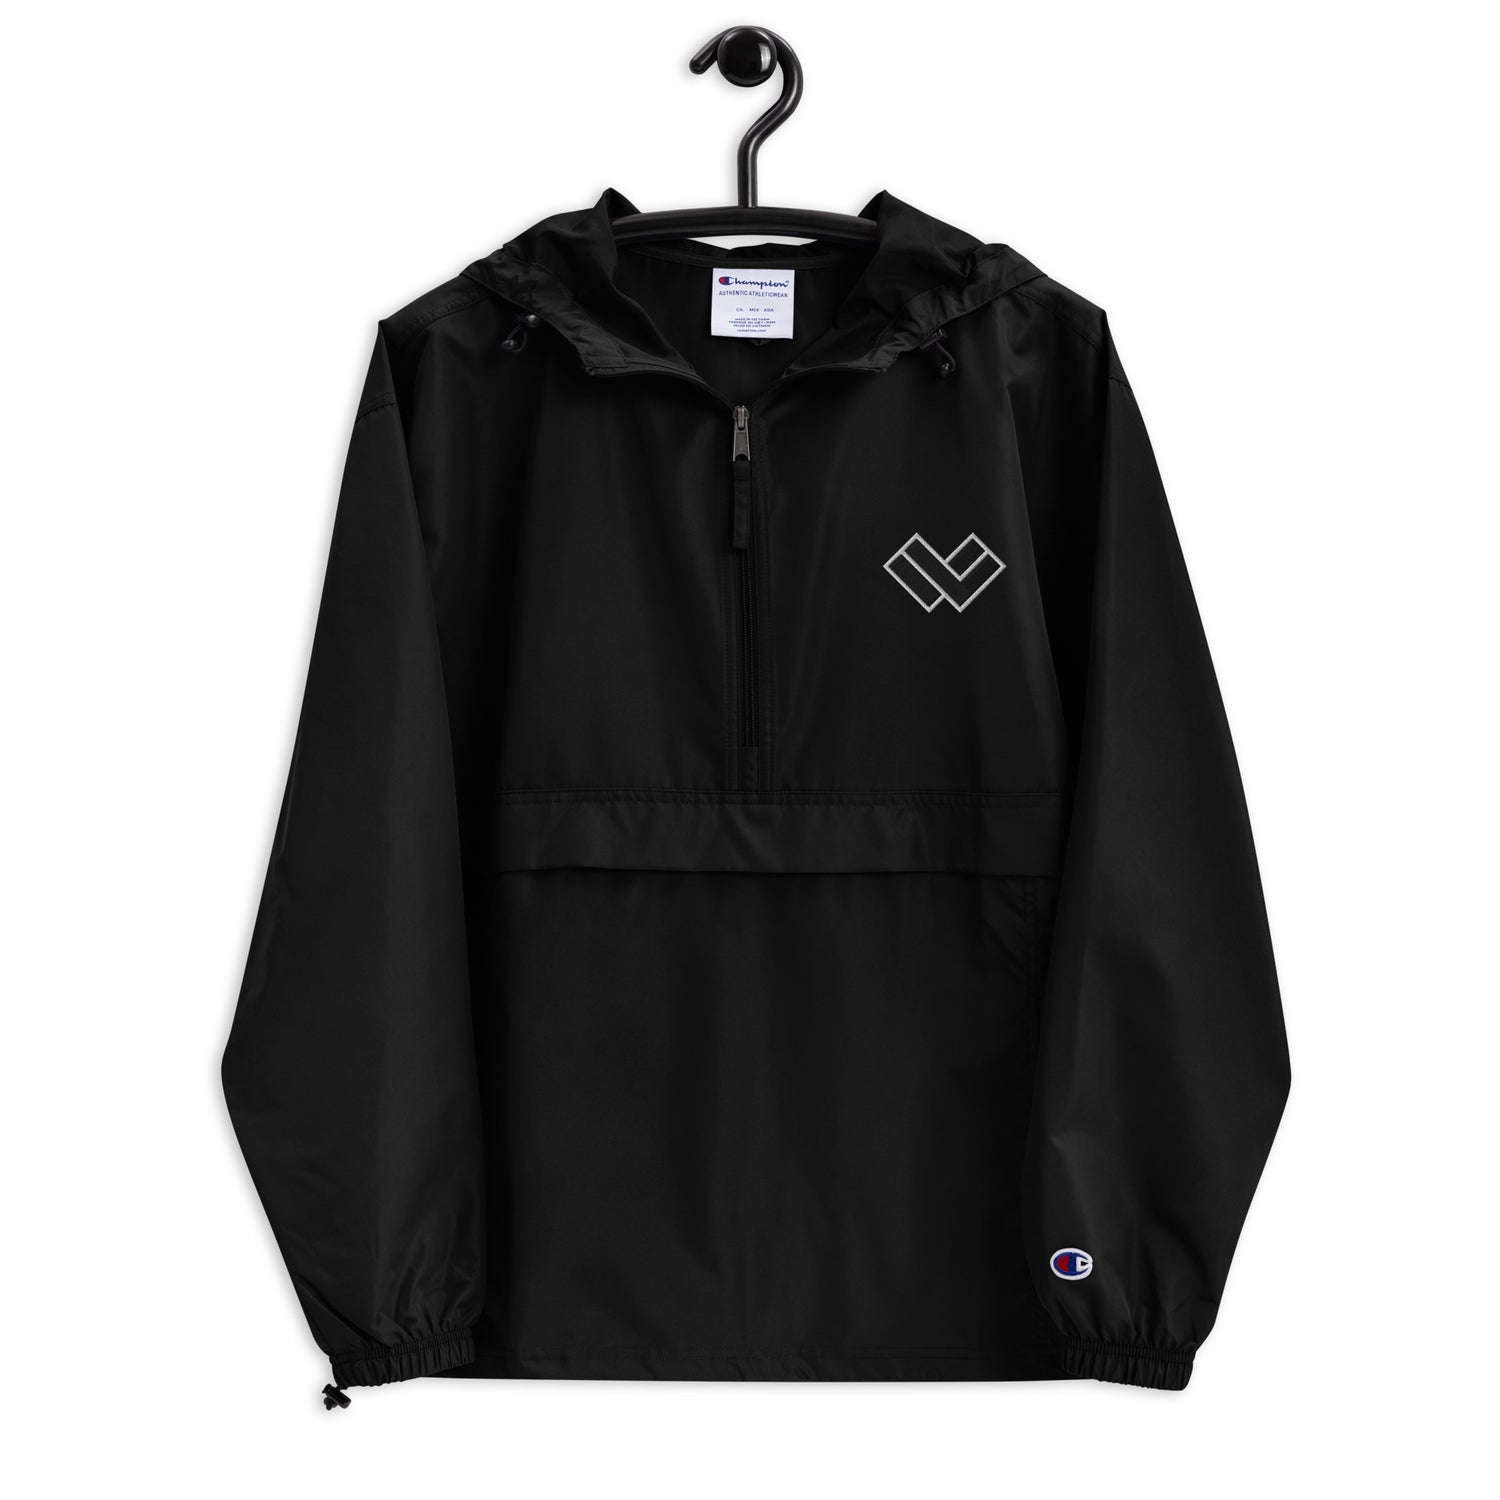 Women's “Lax World x Champion” Cradle Multi-shaded Packable Lacrosse Jacket - Front 